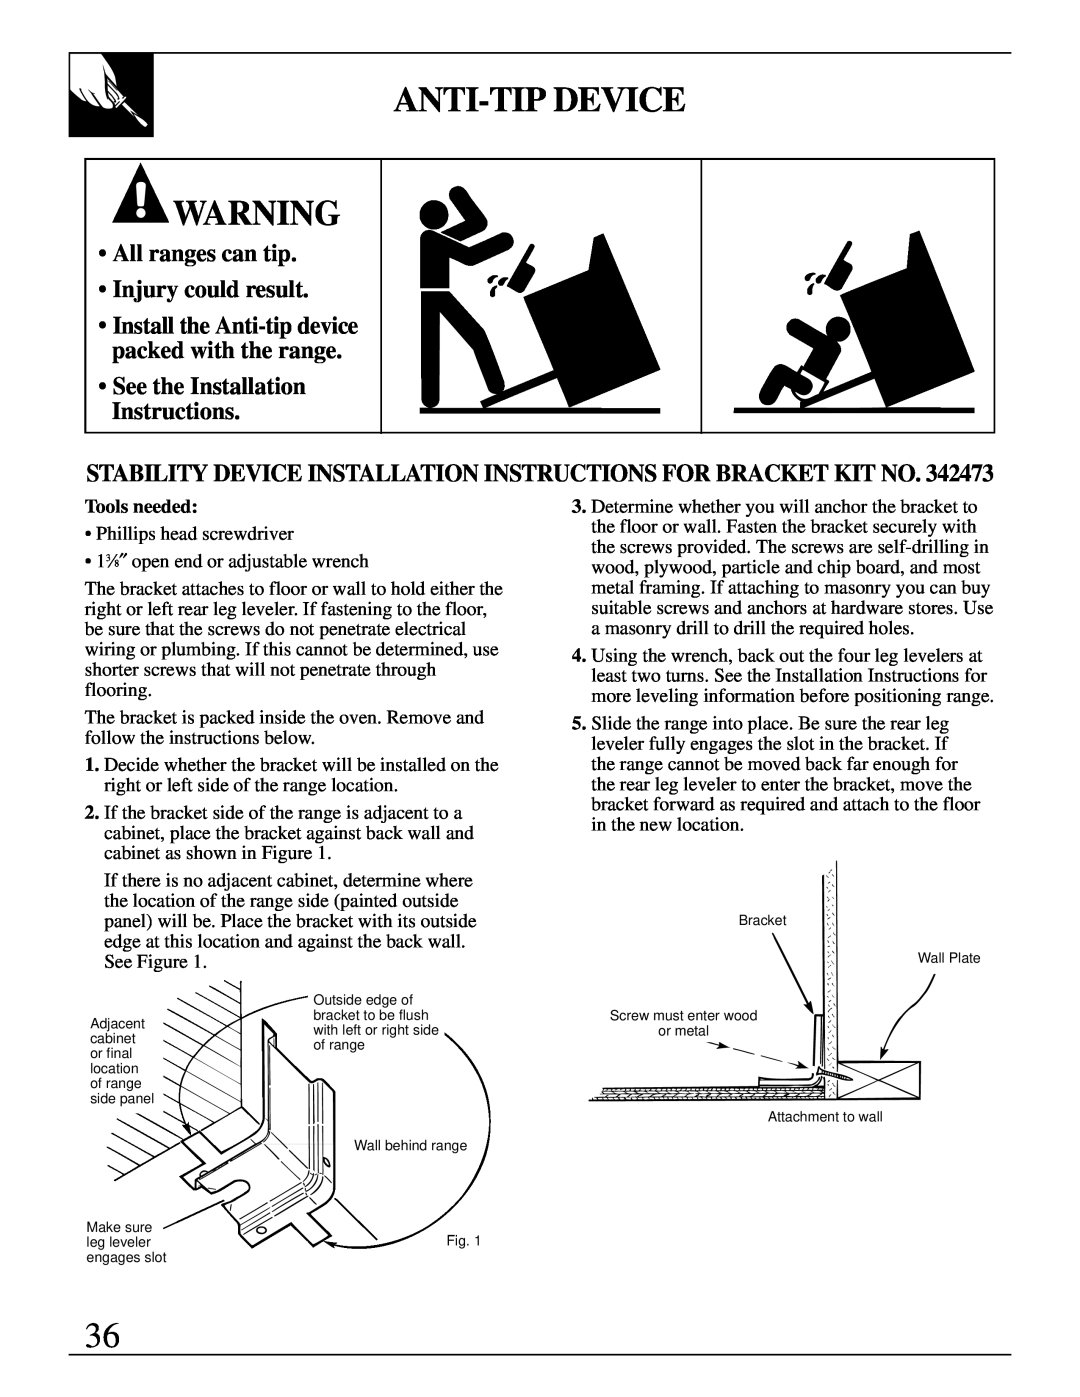 GE RB787 warranty Anti-Tip Device, All ranges can tip Injury could result, See the Installation Instructions, Tools needed 